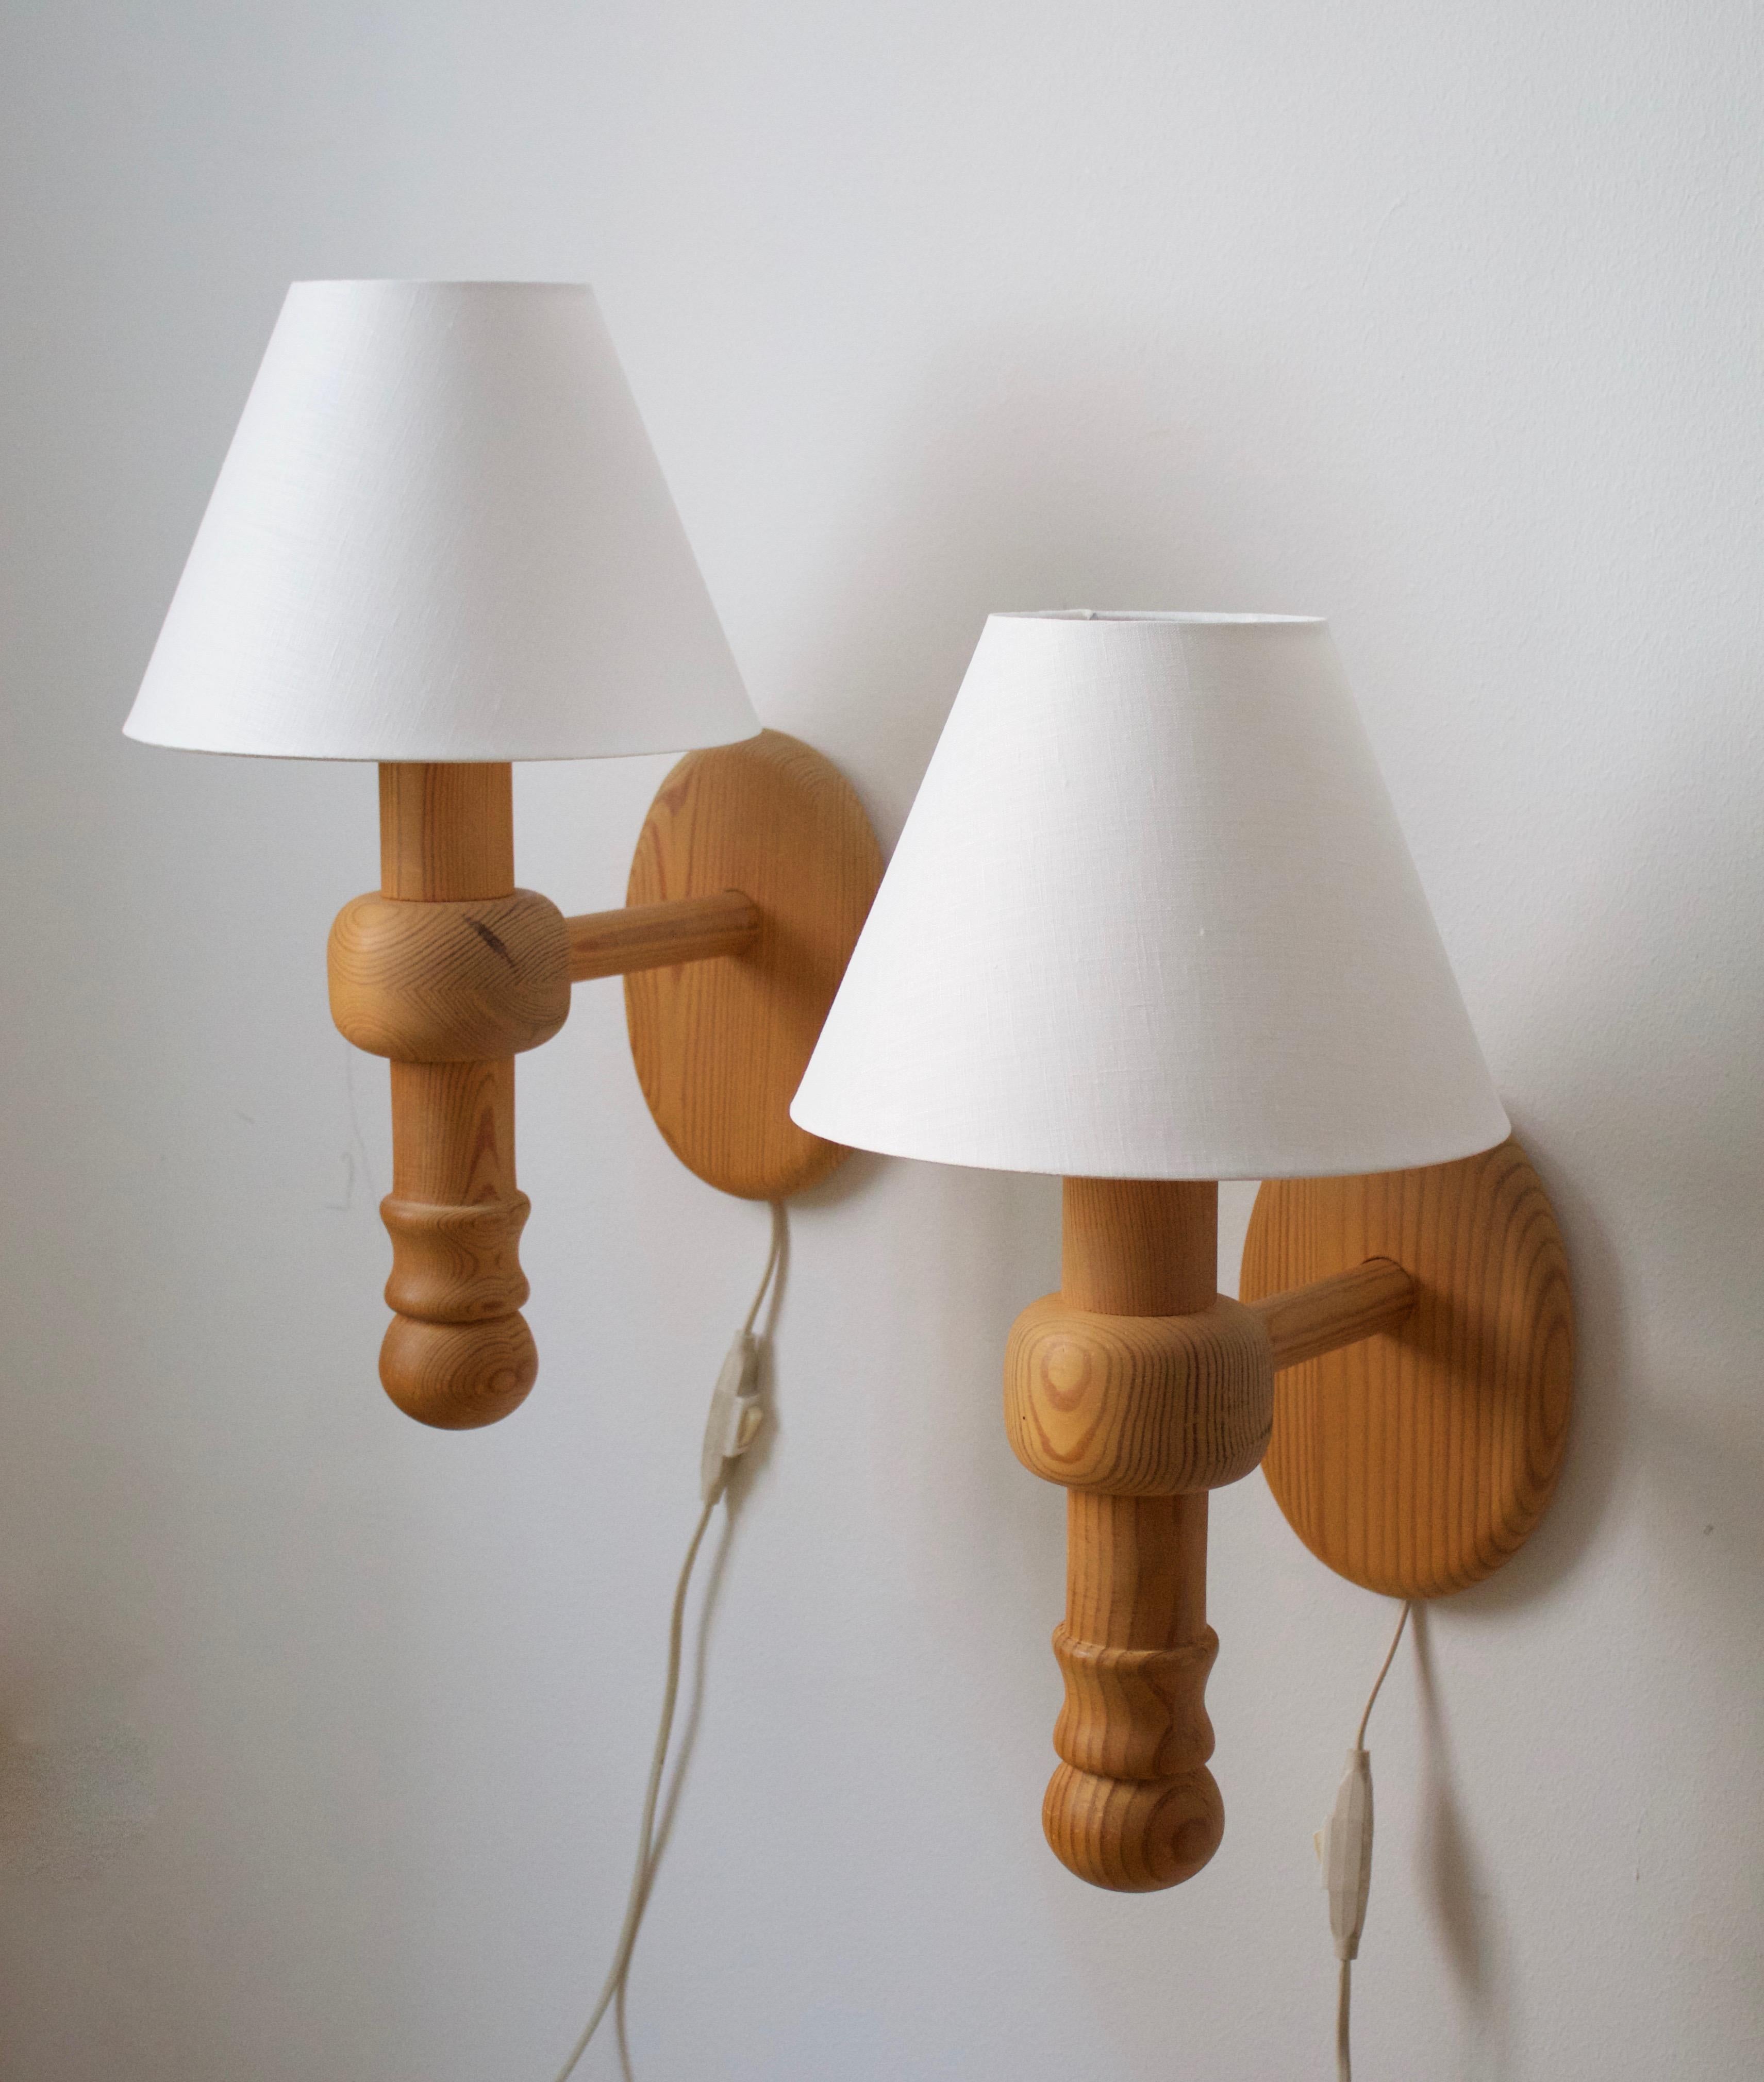 A pair of wall lights / sconces, produced by AB Stilarmatur, Tranås, Sweden. Produced in the 1970s. In solid turned pine. With brand new fabric screens.

Other designers of the period include Josef Frank, Hans-Agne Jacobsen, Paavo Tynell, Lisa